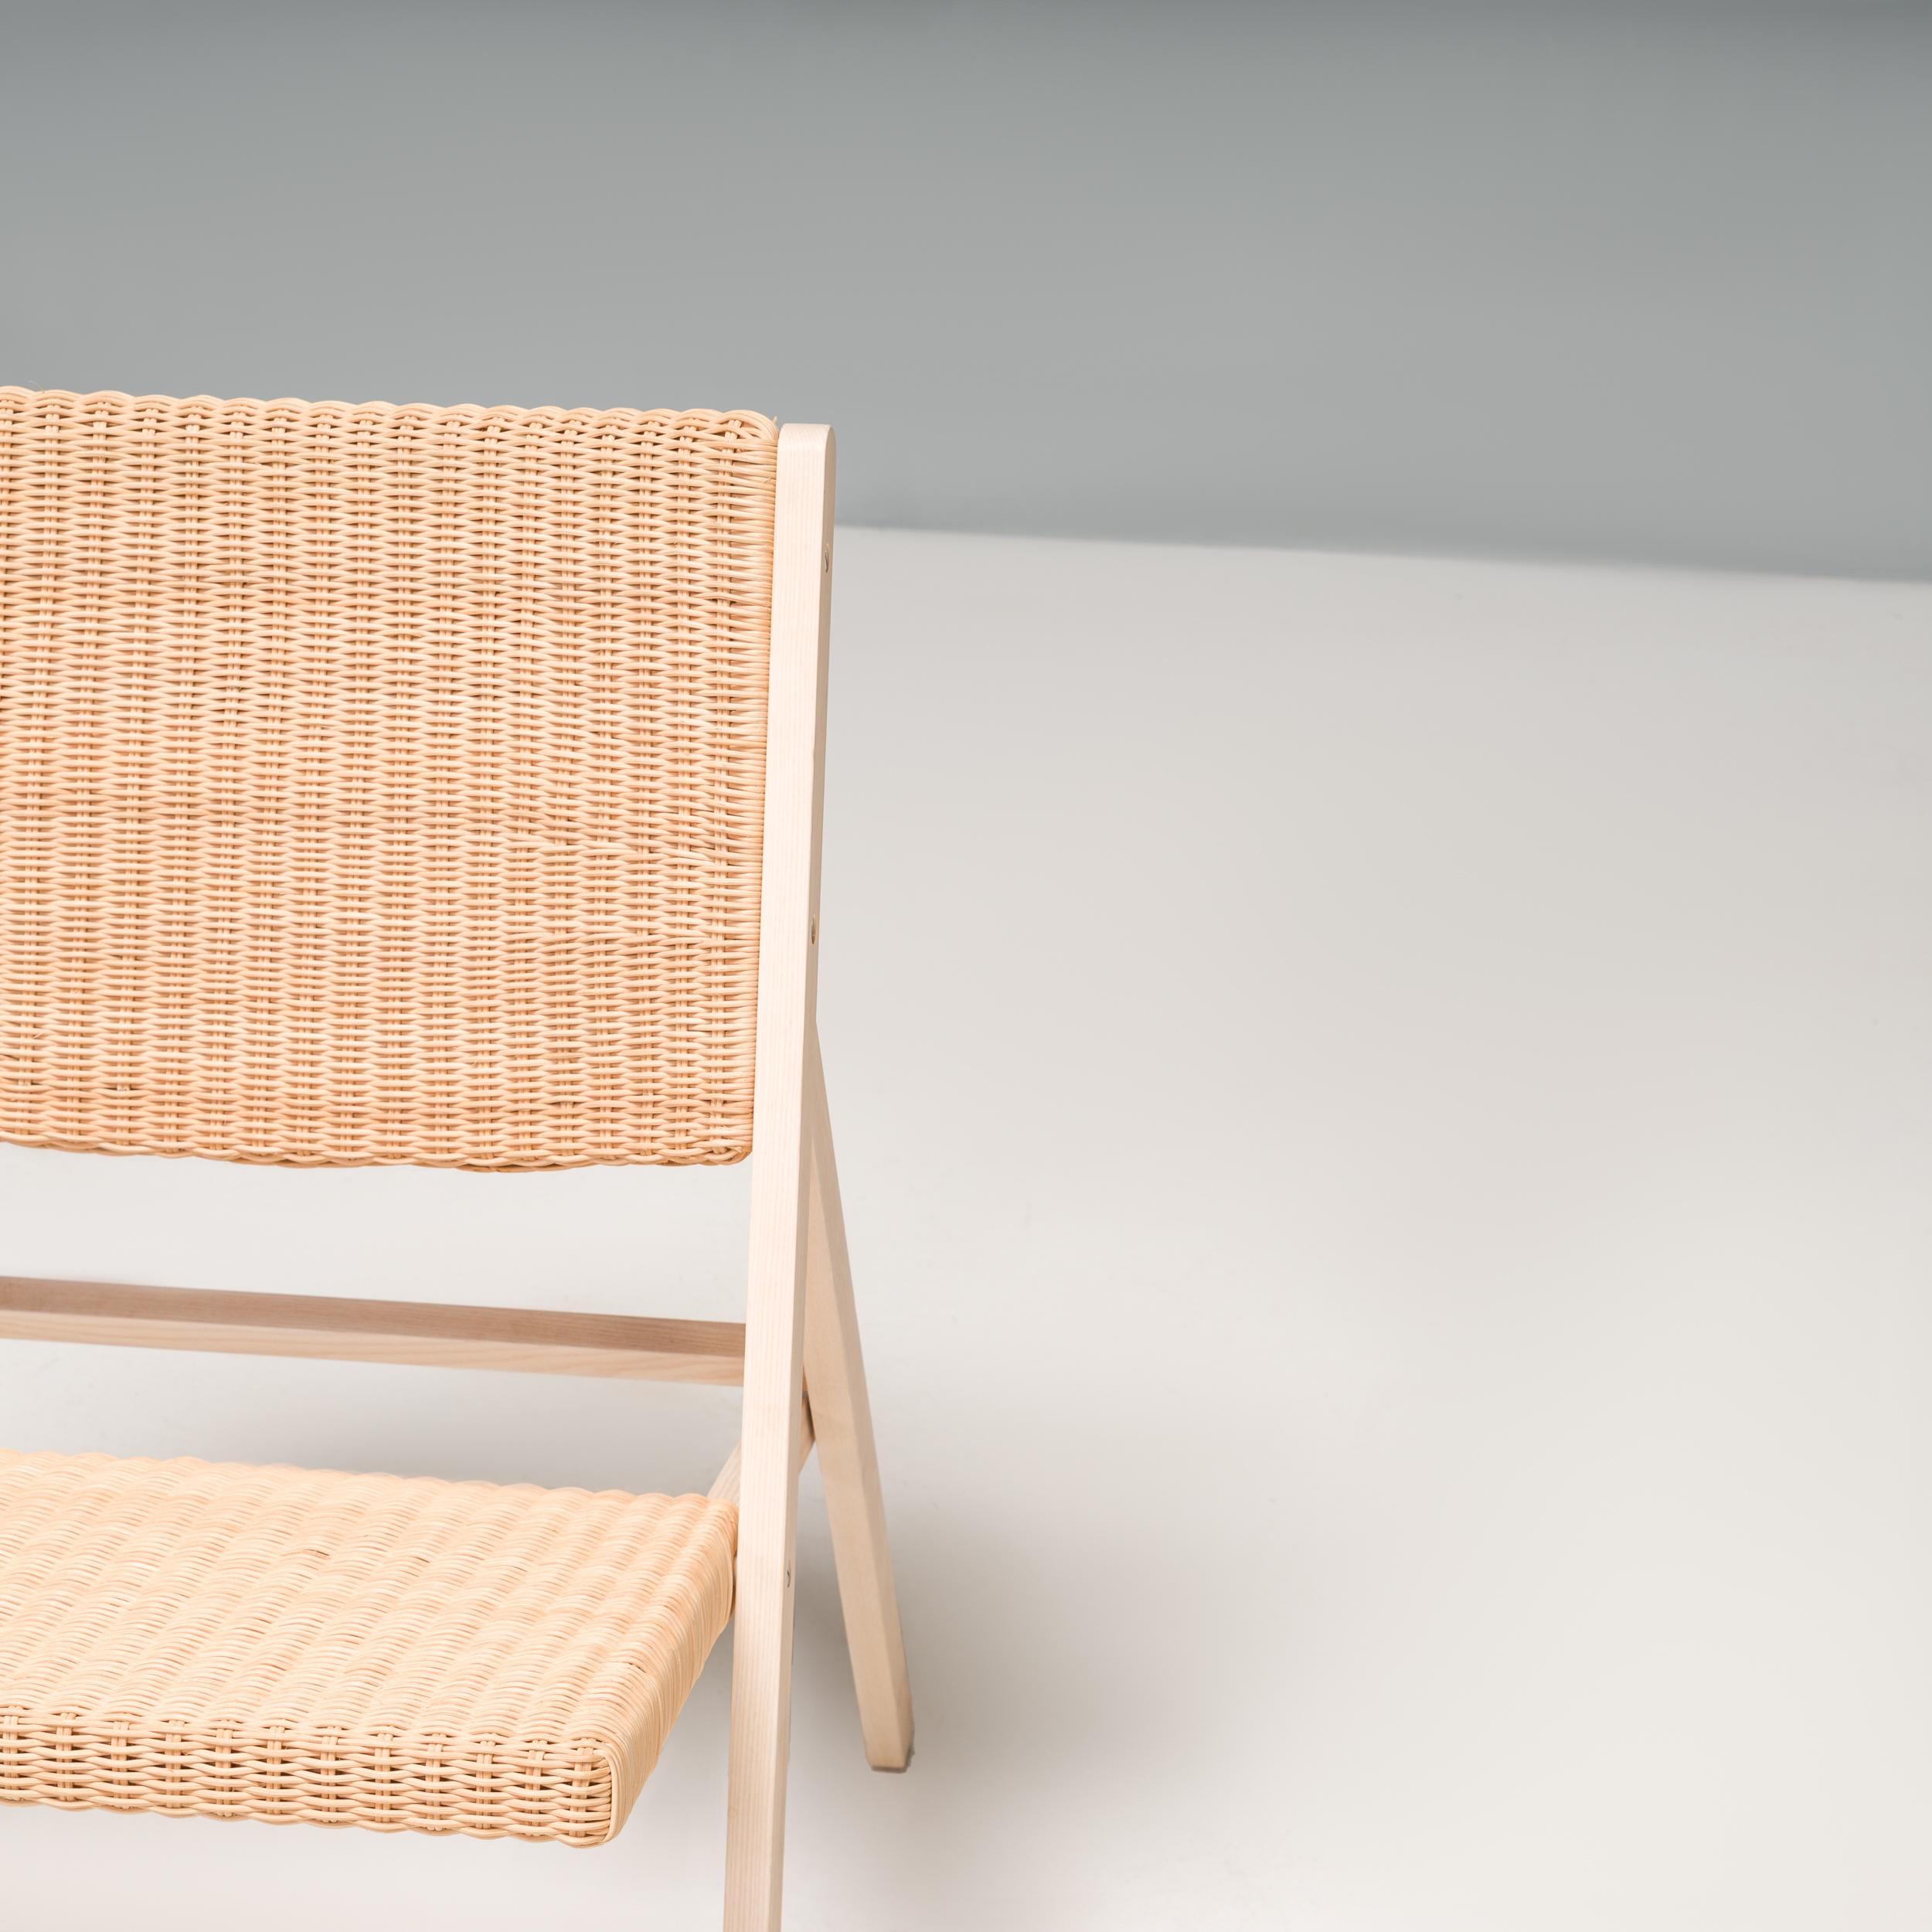 Gio Ponti for Molteni&C D.270.1 Wicker Folding Chairs, Set of 2 For Sale 2